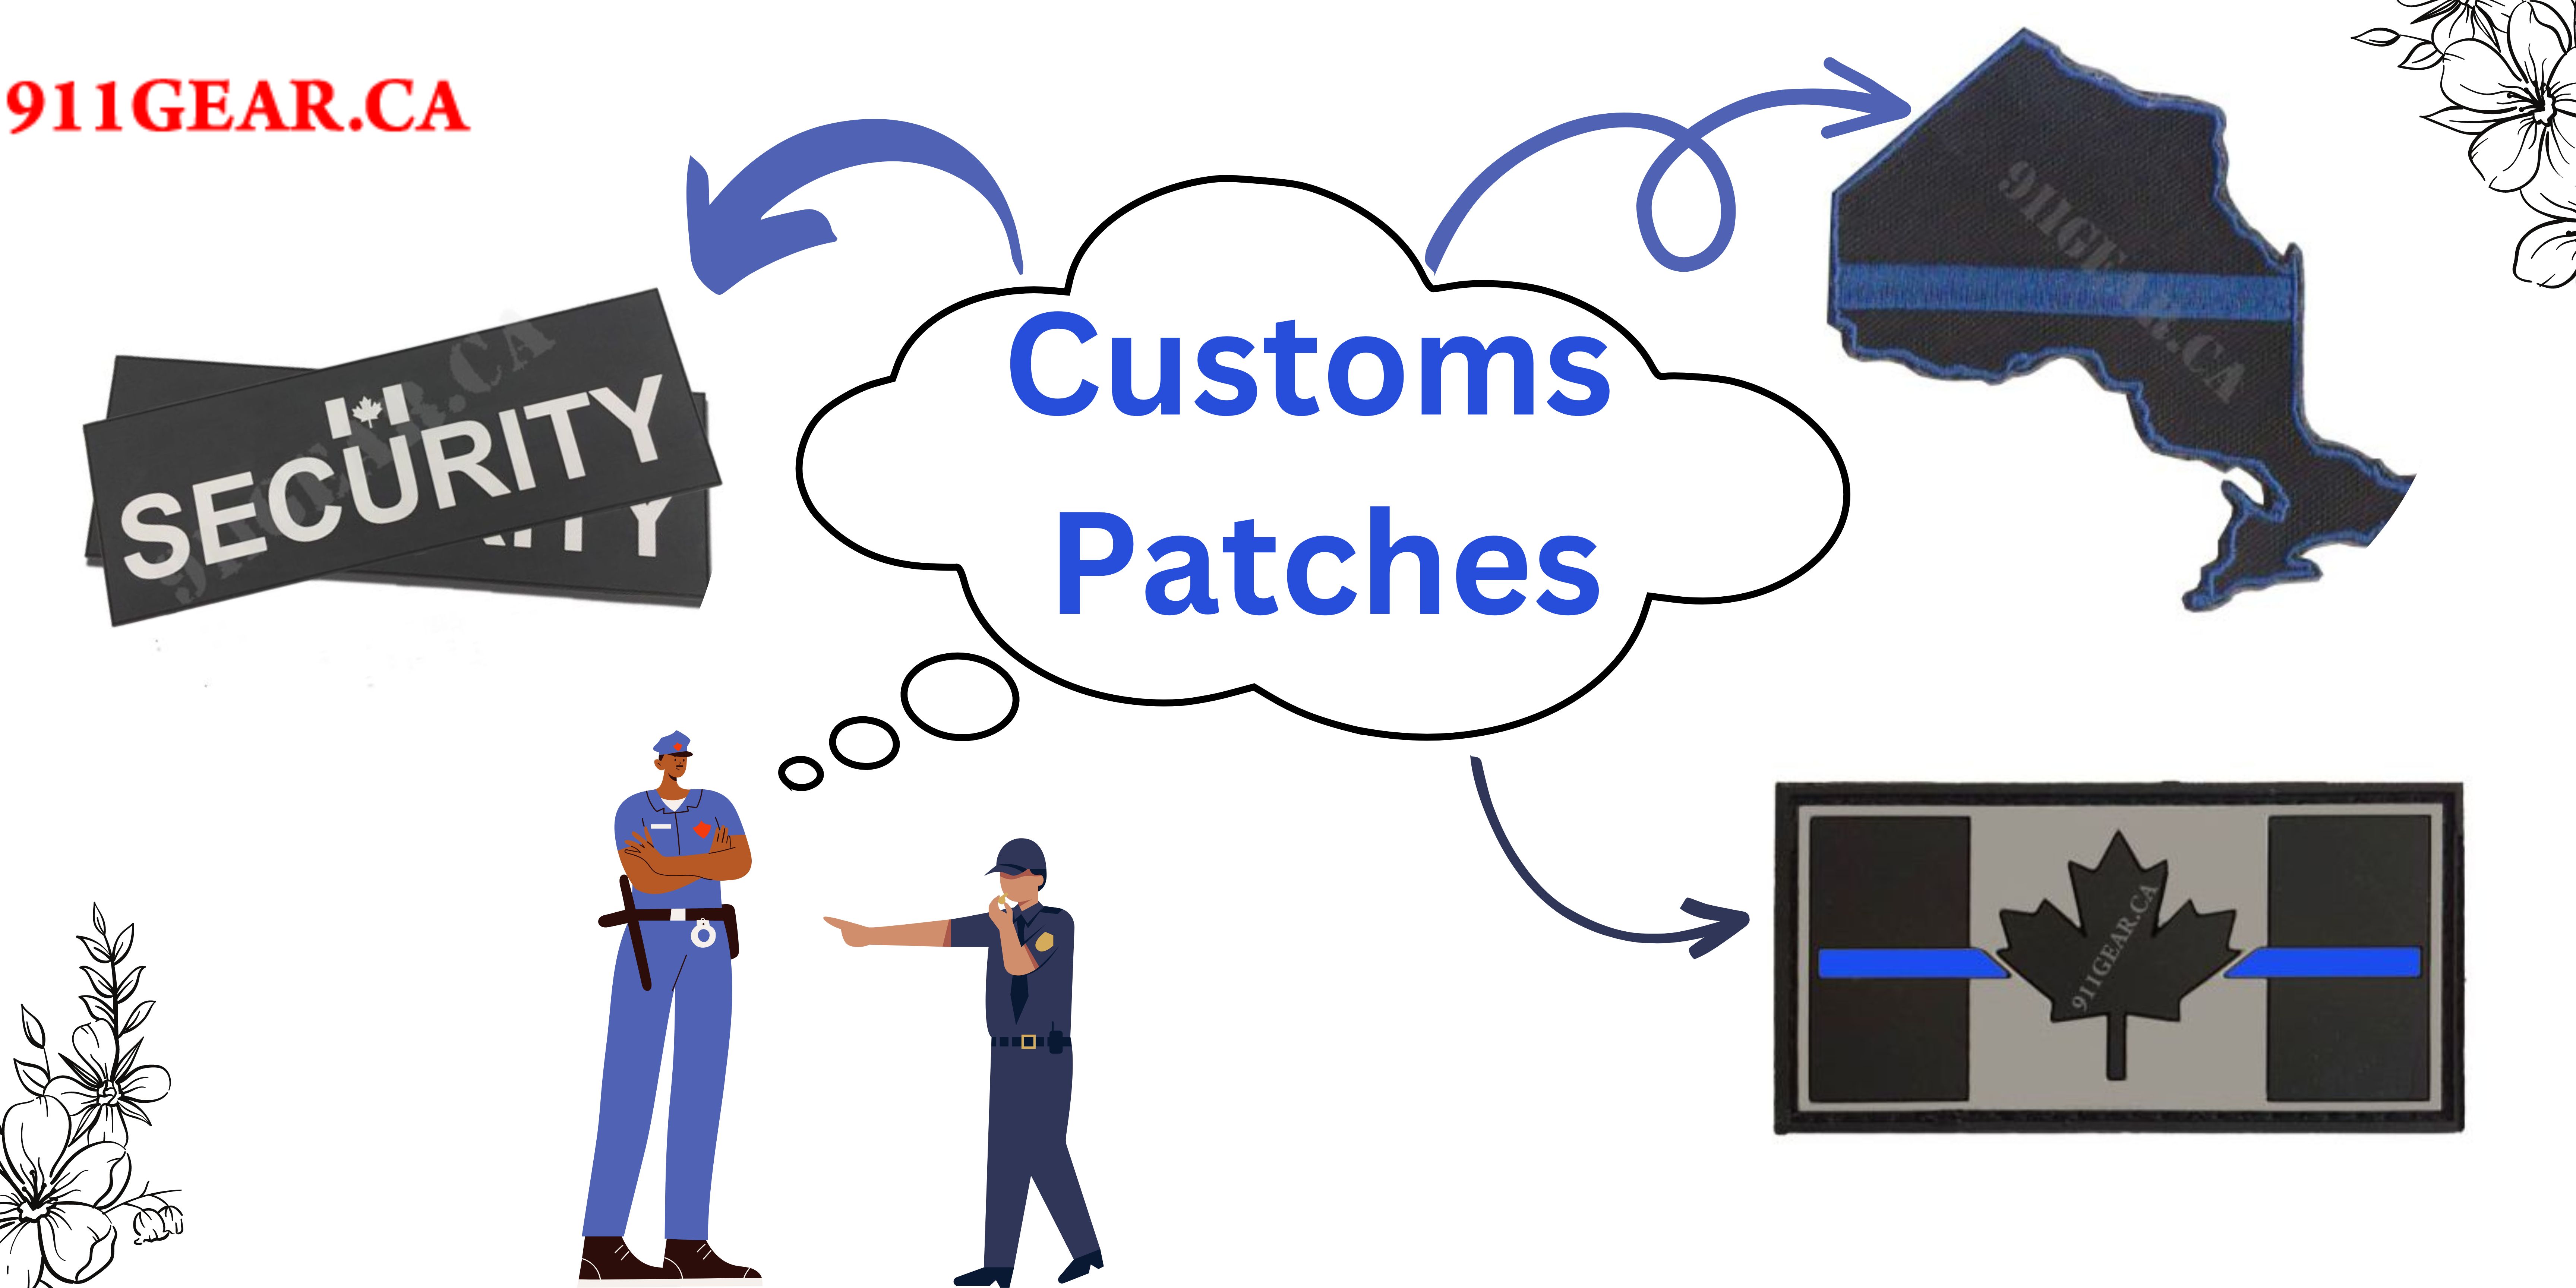 Customs Patches.jpg